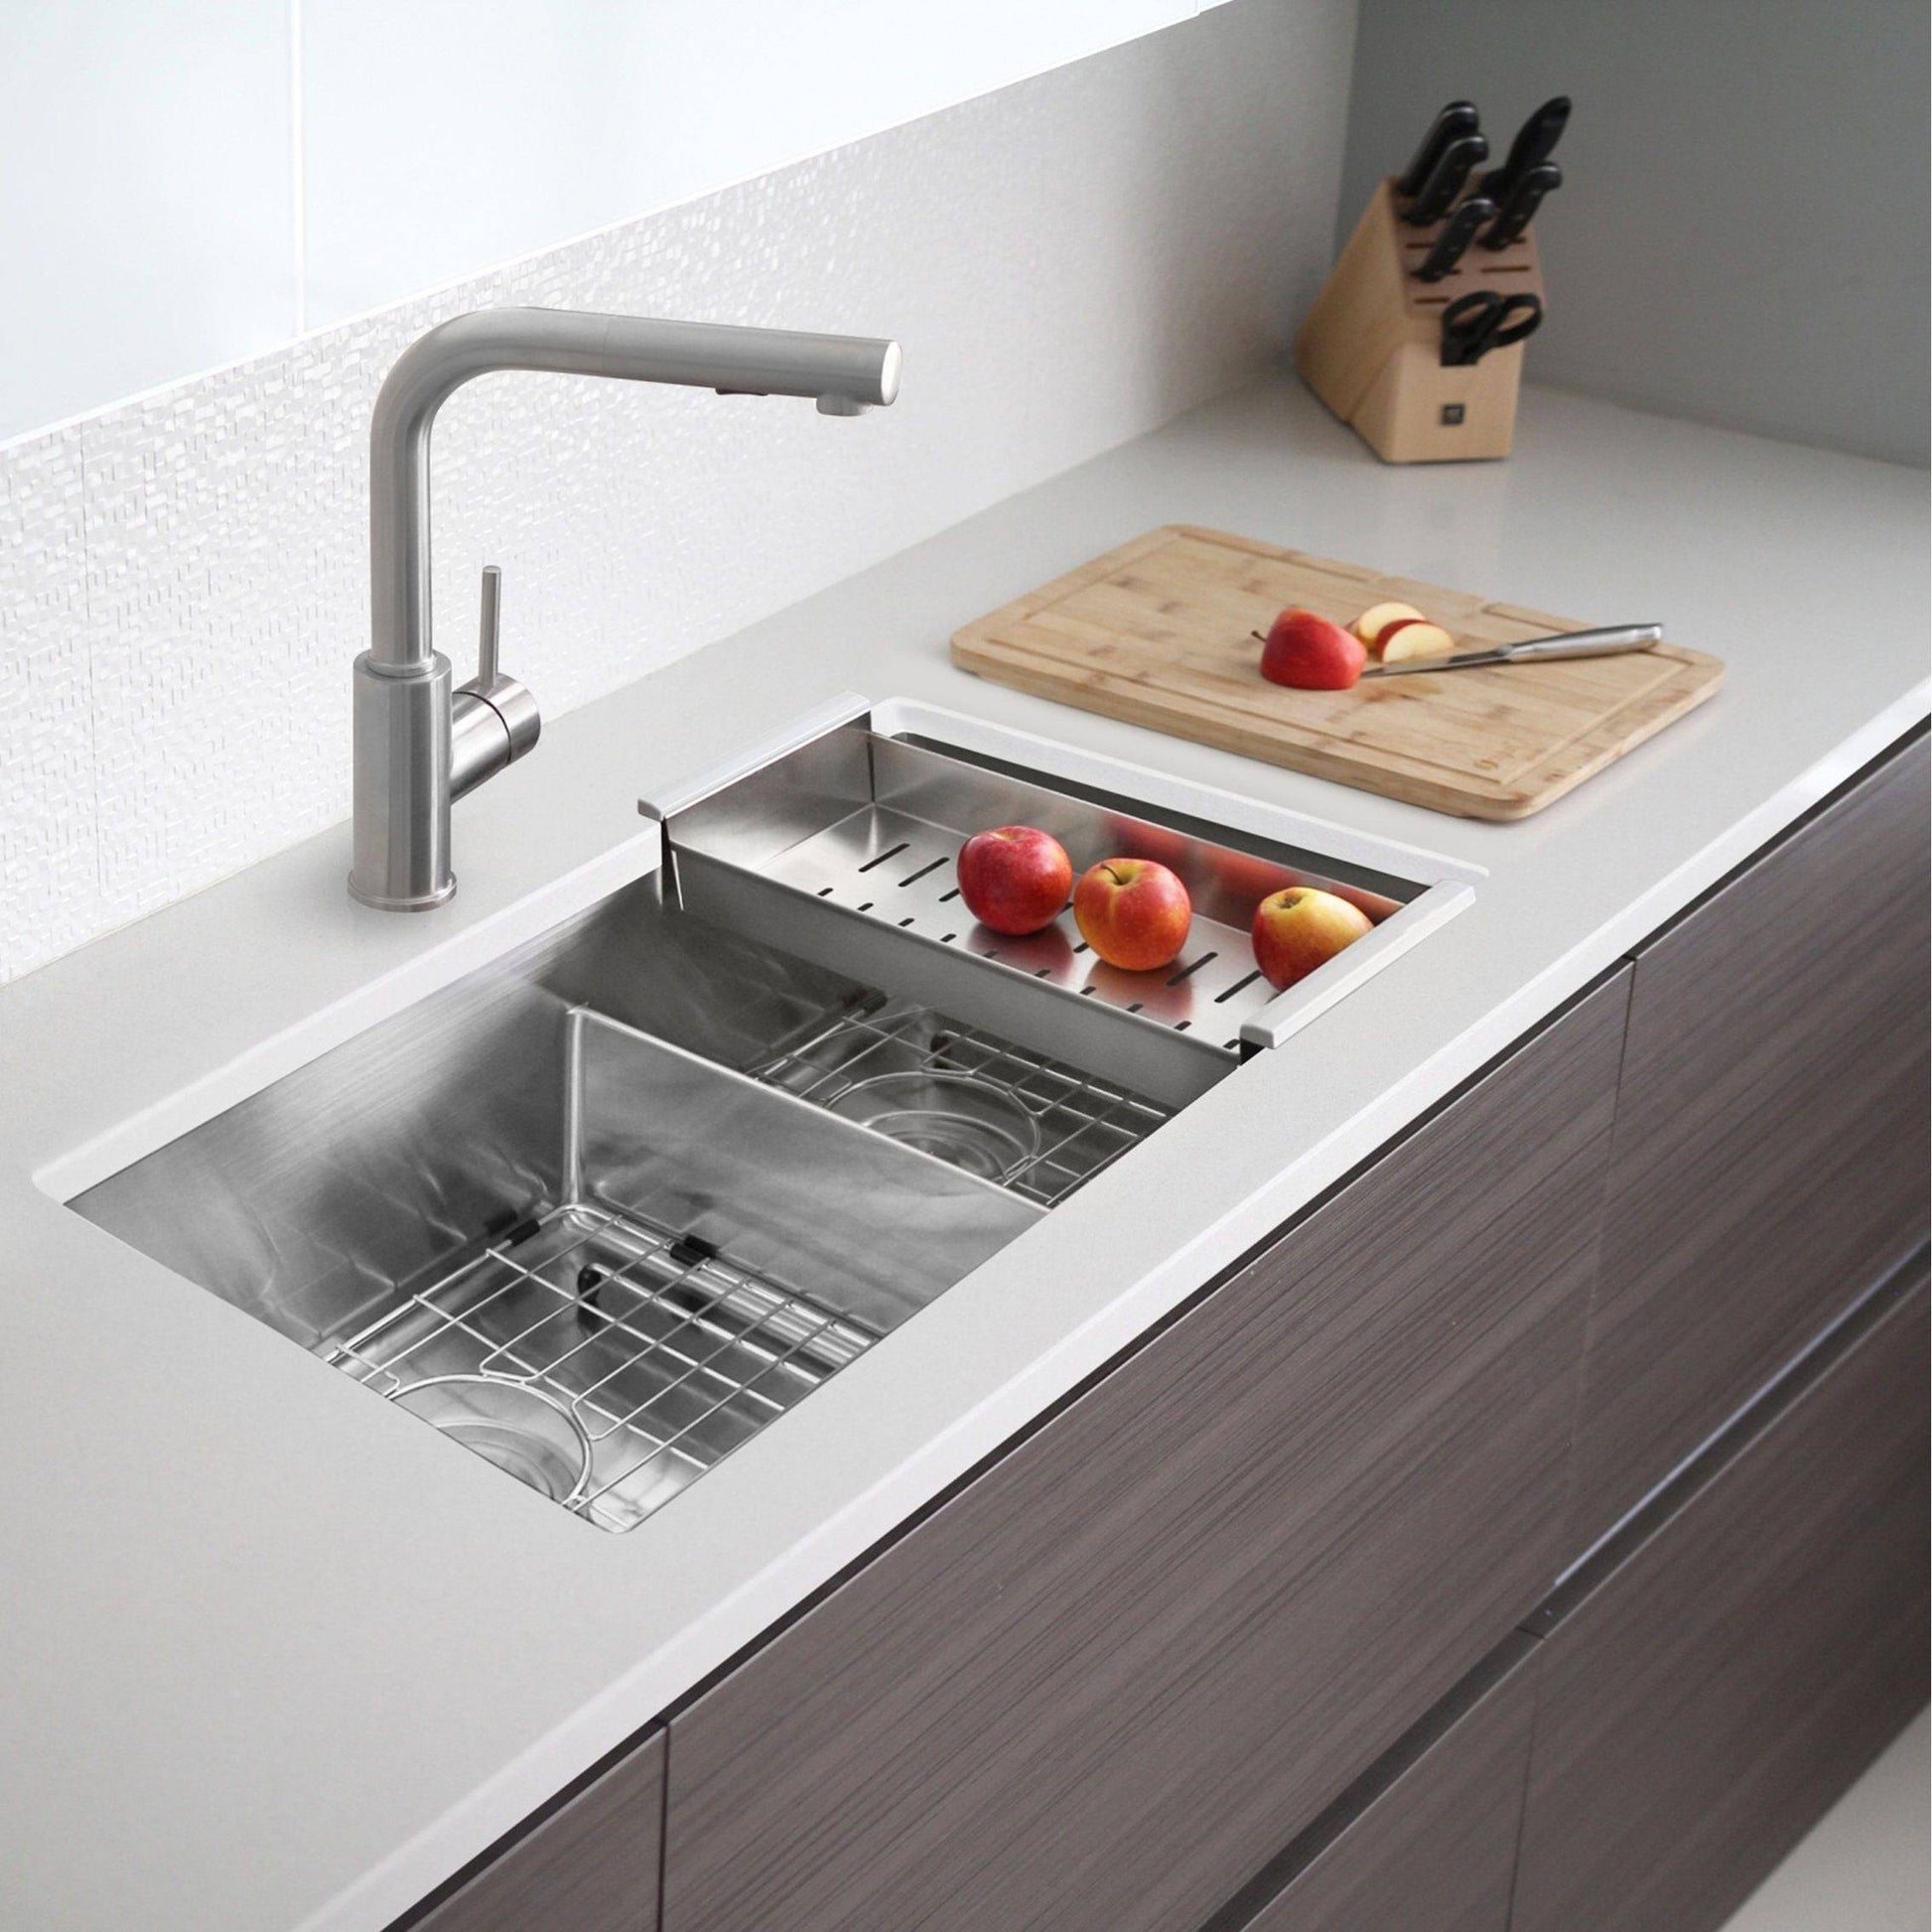 Stylish Roomy 32" x 18" Low Divider 60-40 Double Bowl Undermount Stainless Steel Kitchen Sink S-325XG - Renoz